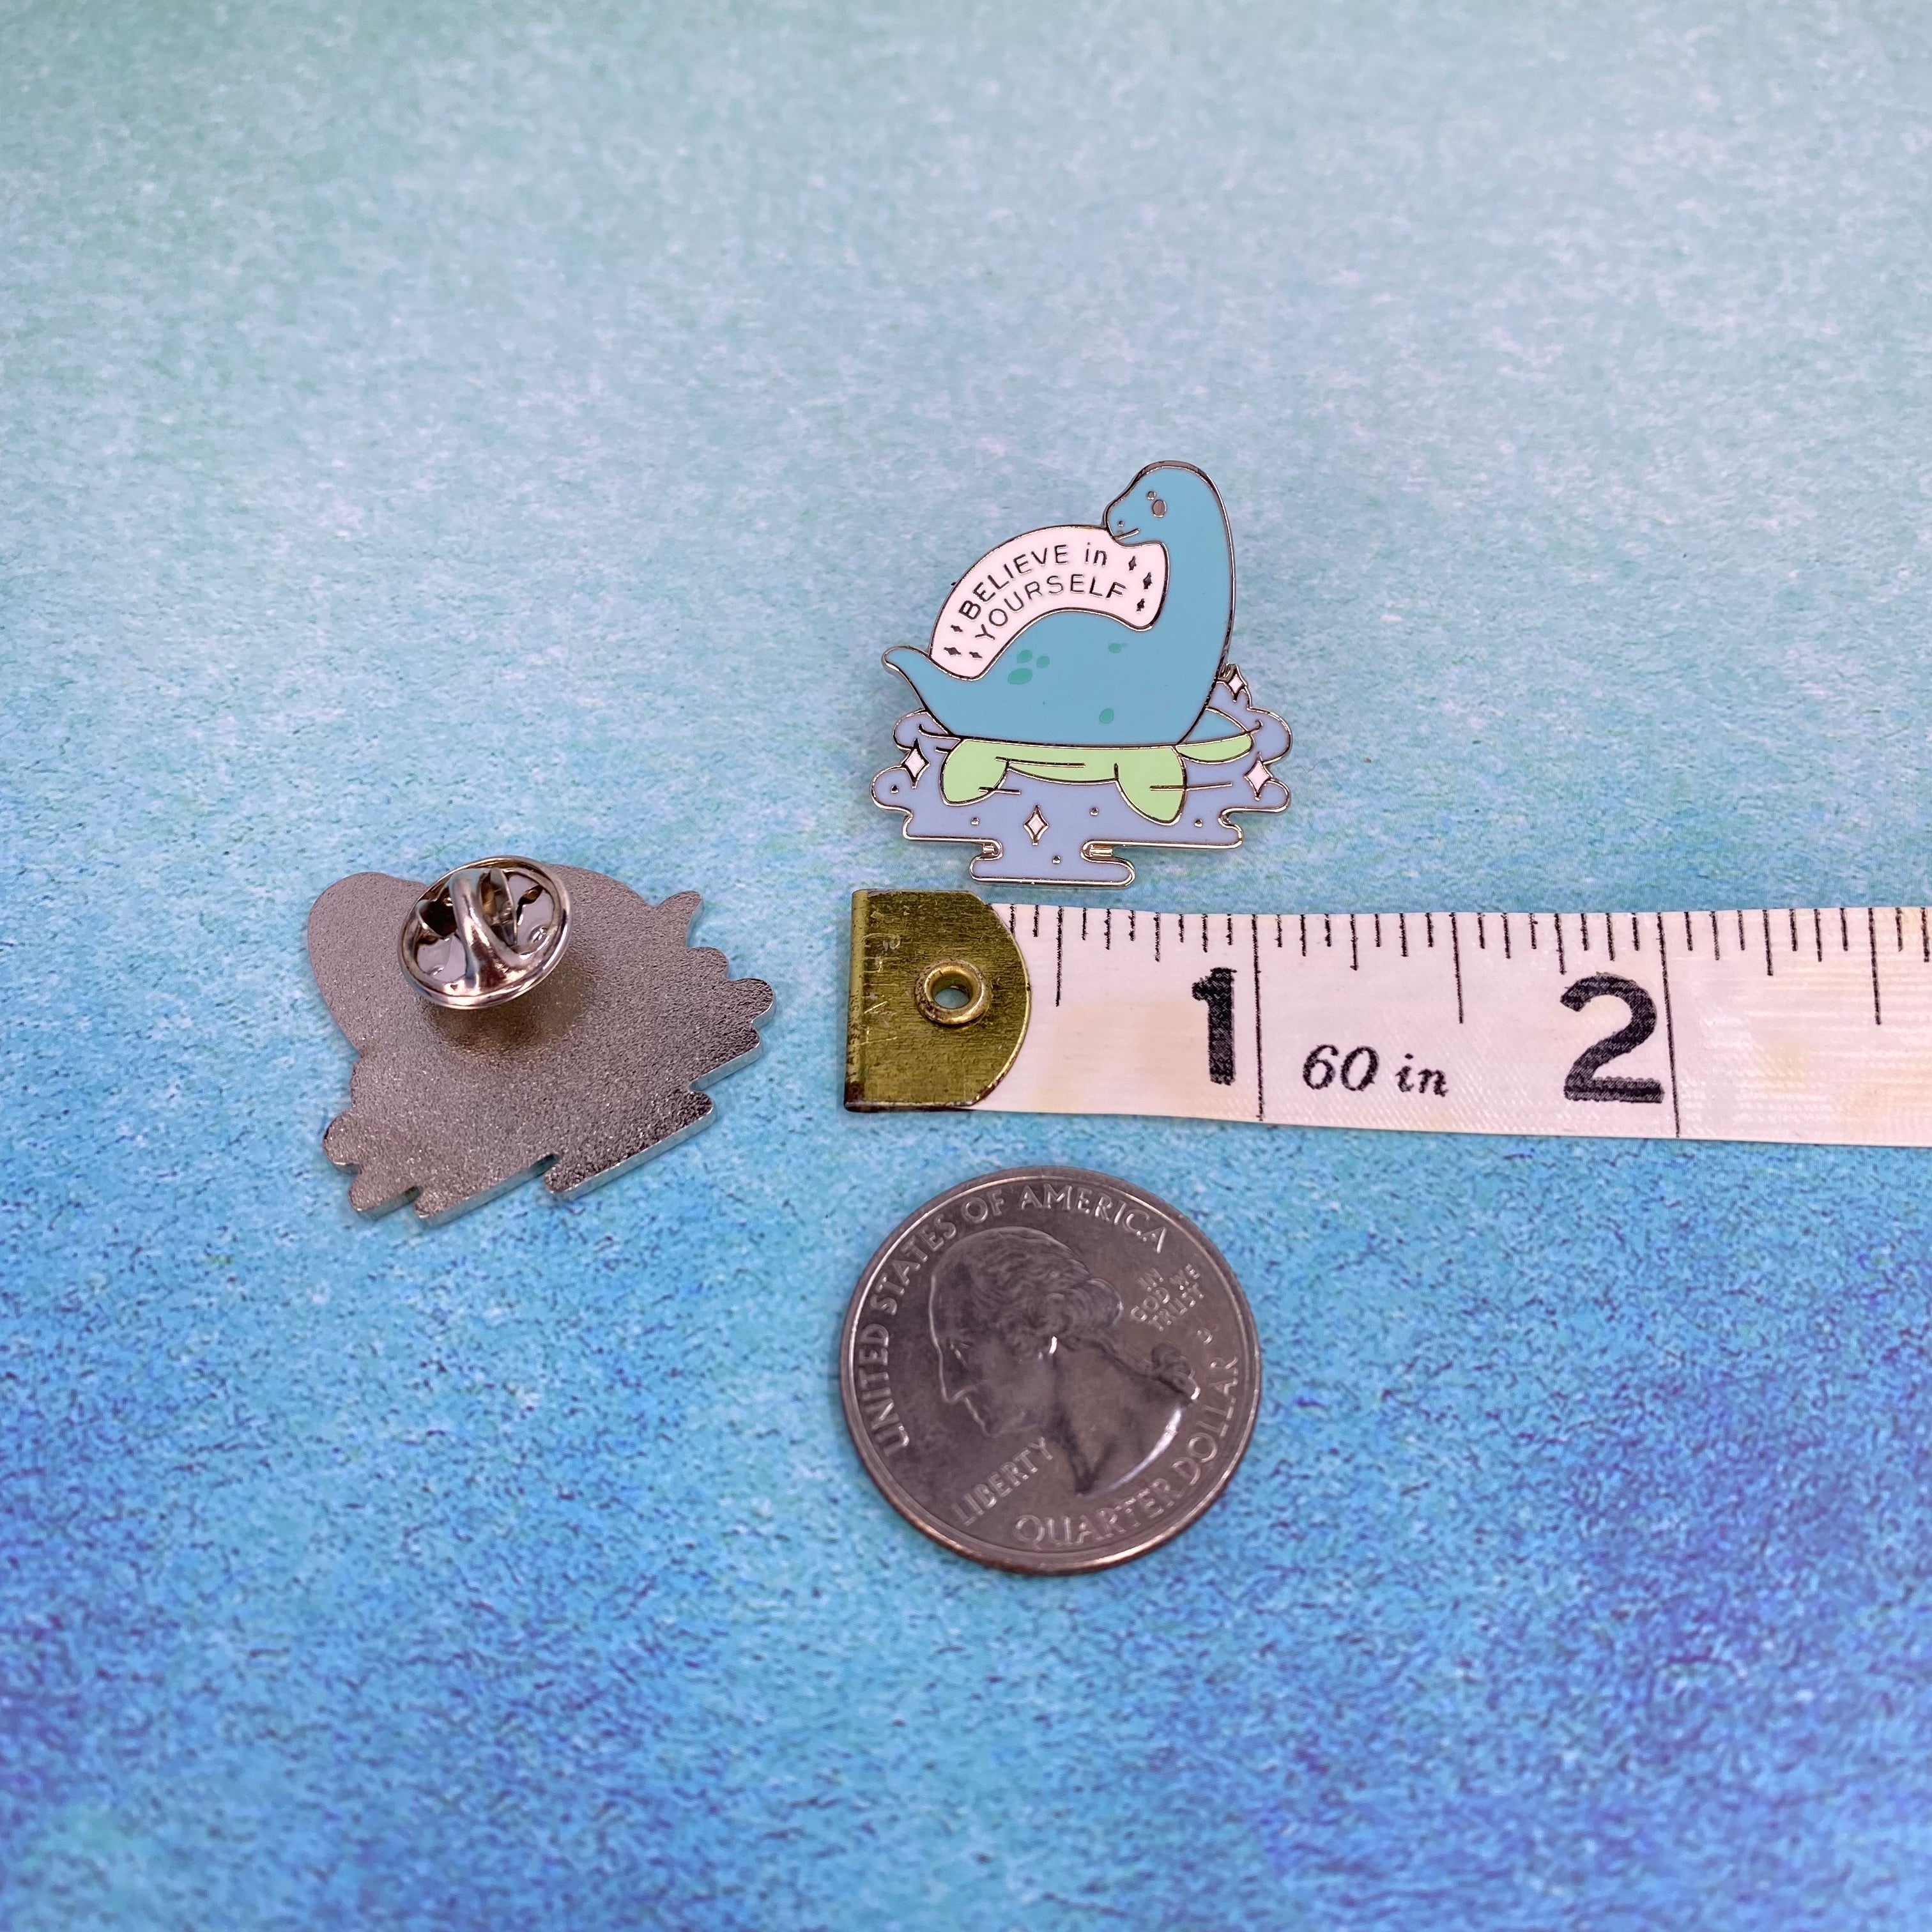 Nessie the Loch Ness Monster Small Enamel Coated Metal Pins